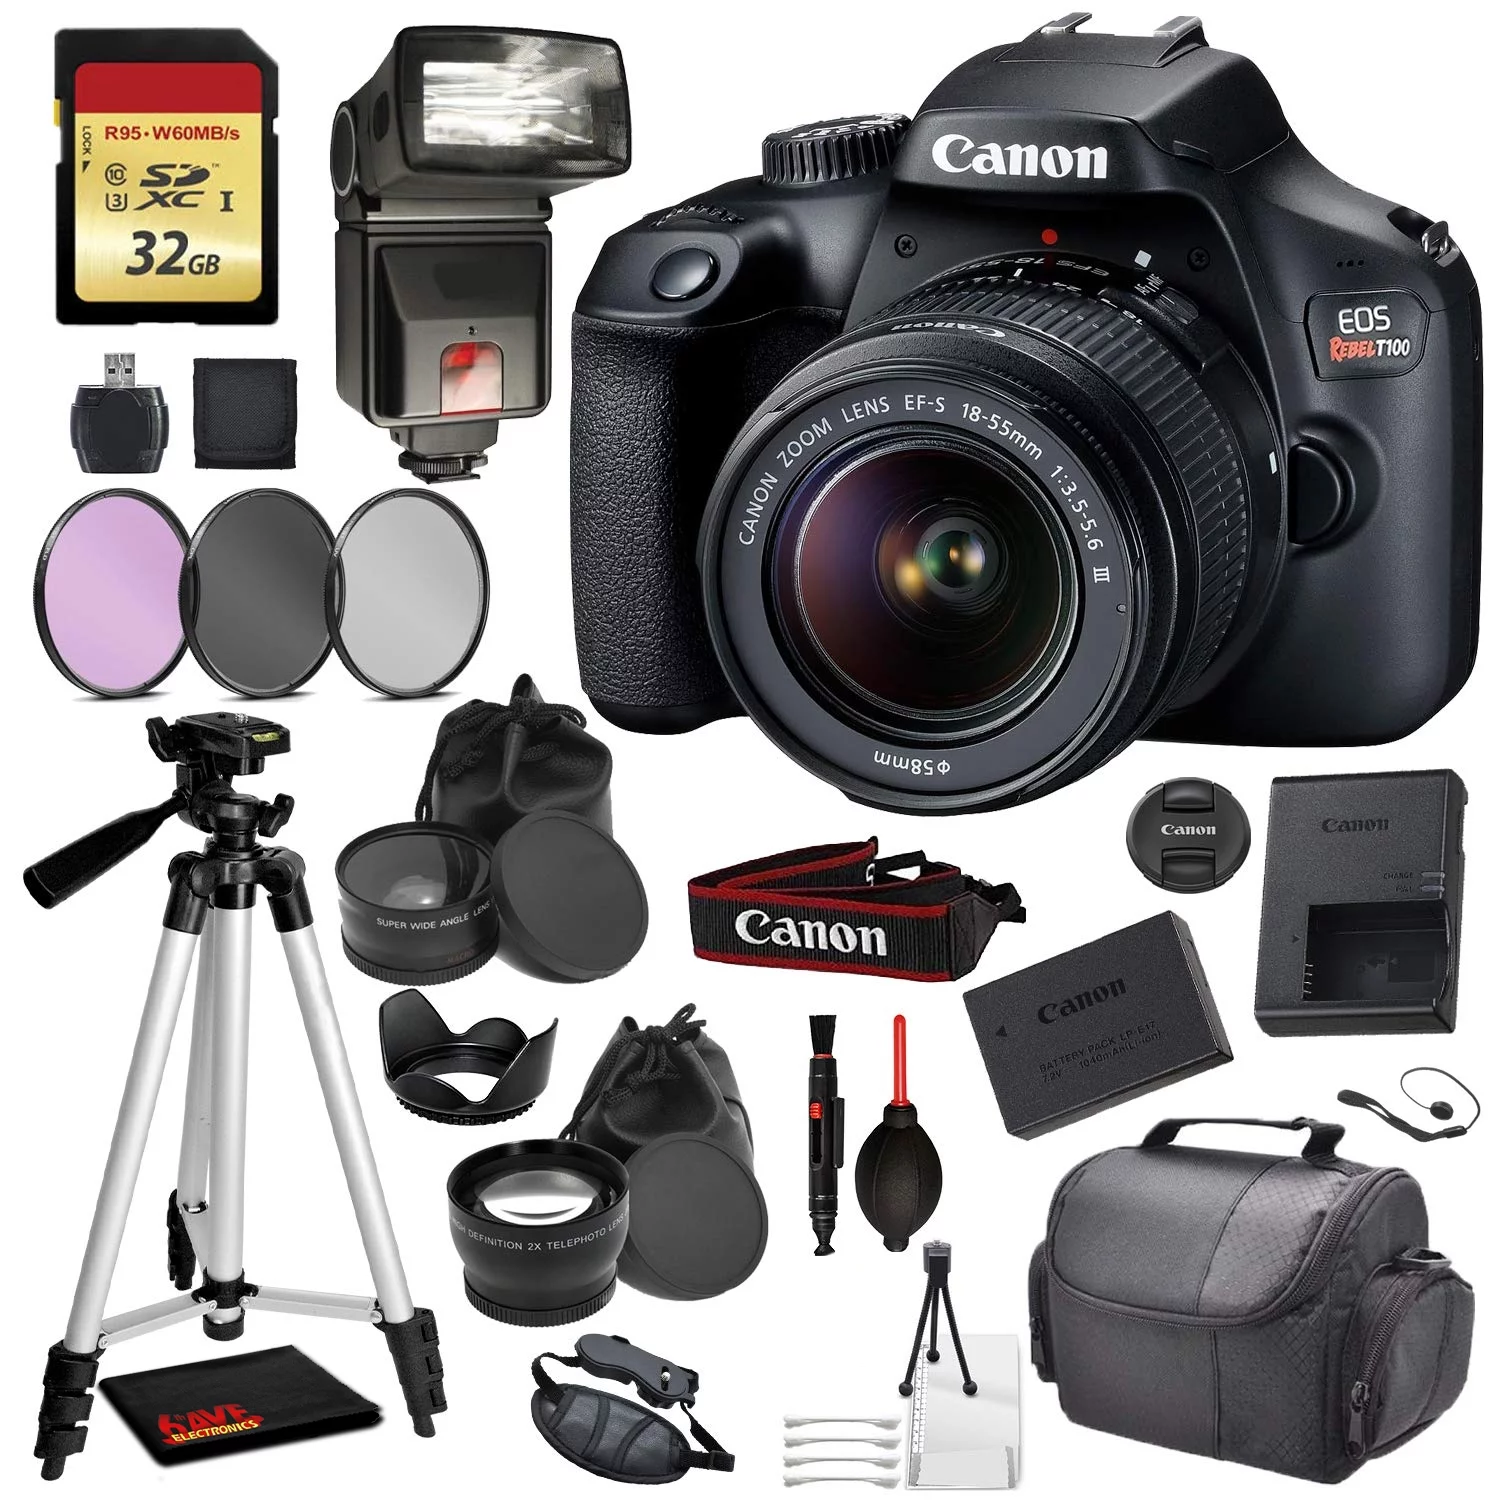 Canon EOS Rebel 4000D/ T100 Digital SLR Camera with EF-S 18-55mm f/3.5-5.6 DC III Lens Kit Pro Accessory Bundle Package Deal : 32GB SD Card + DSLR Bag + 57'' Tripod + More